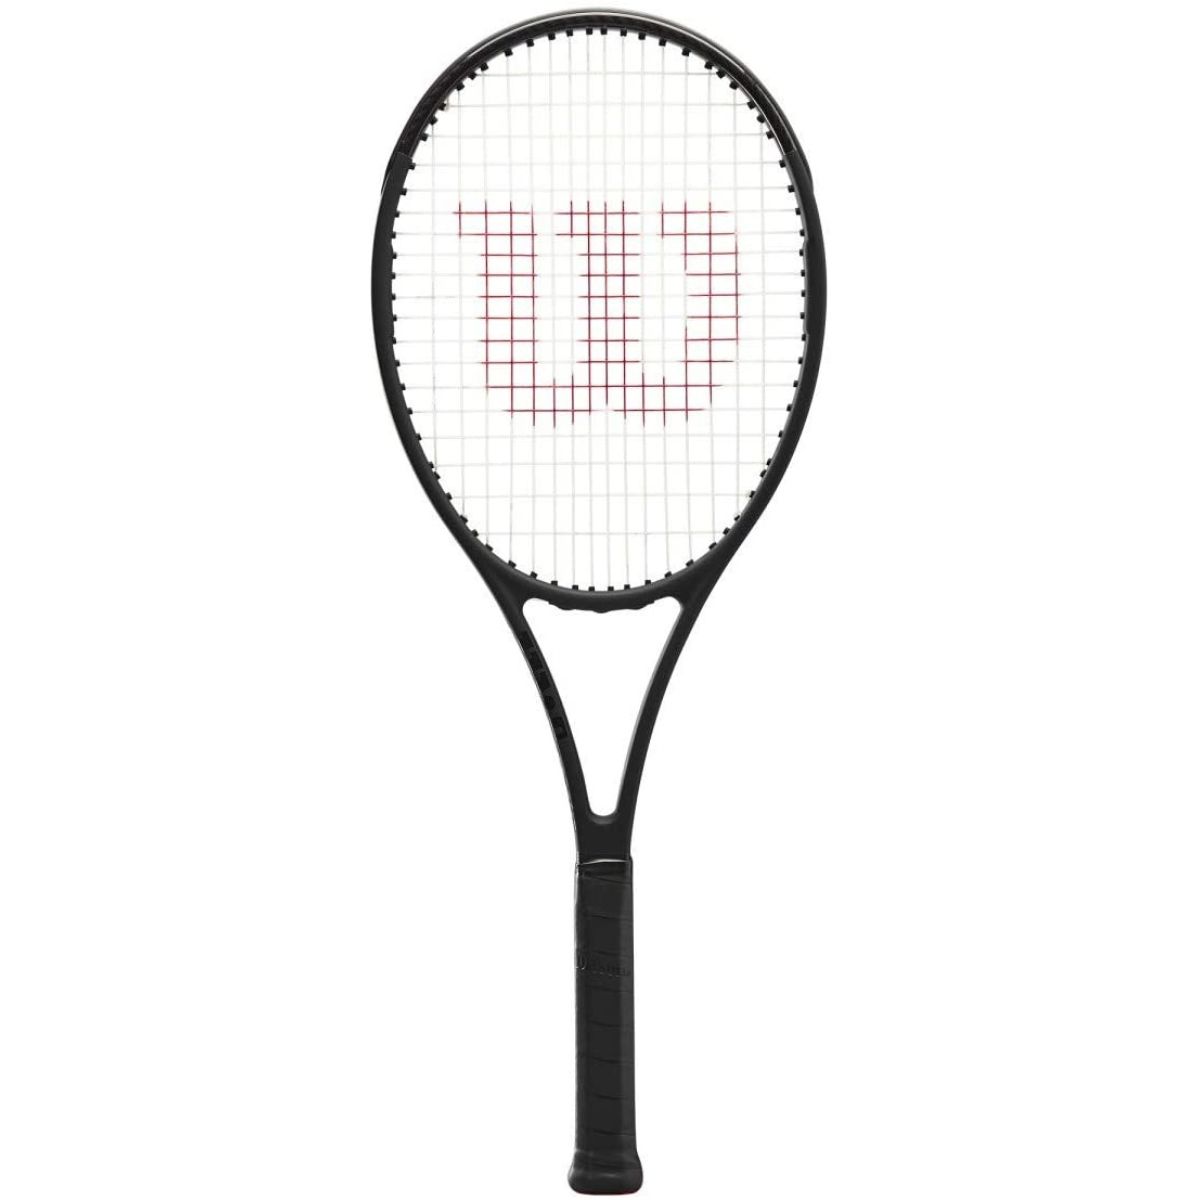 The Best Tennis Rackets for Doubles Options: Wilson Pro Staff 97 v13